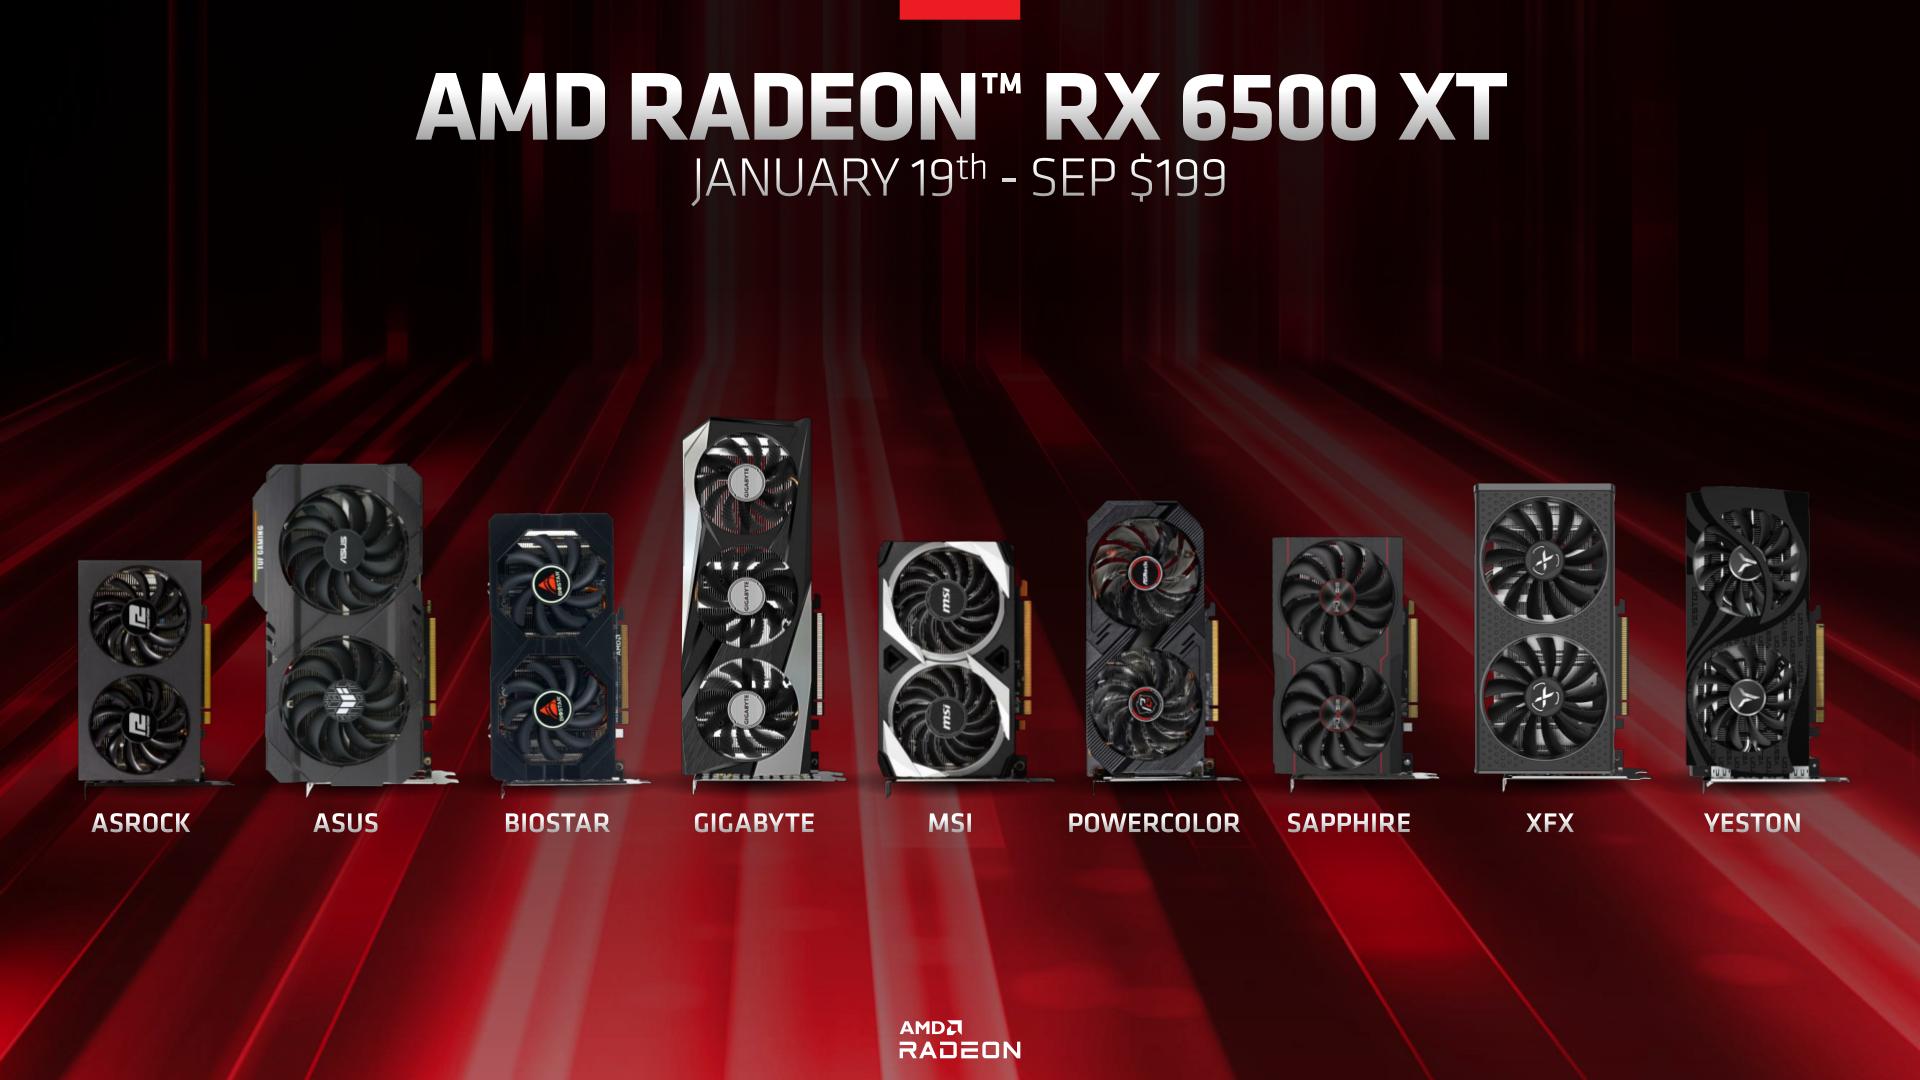 AMD's RX 6500 XT provides $199 entry point for desktop GPU line on